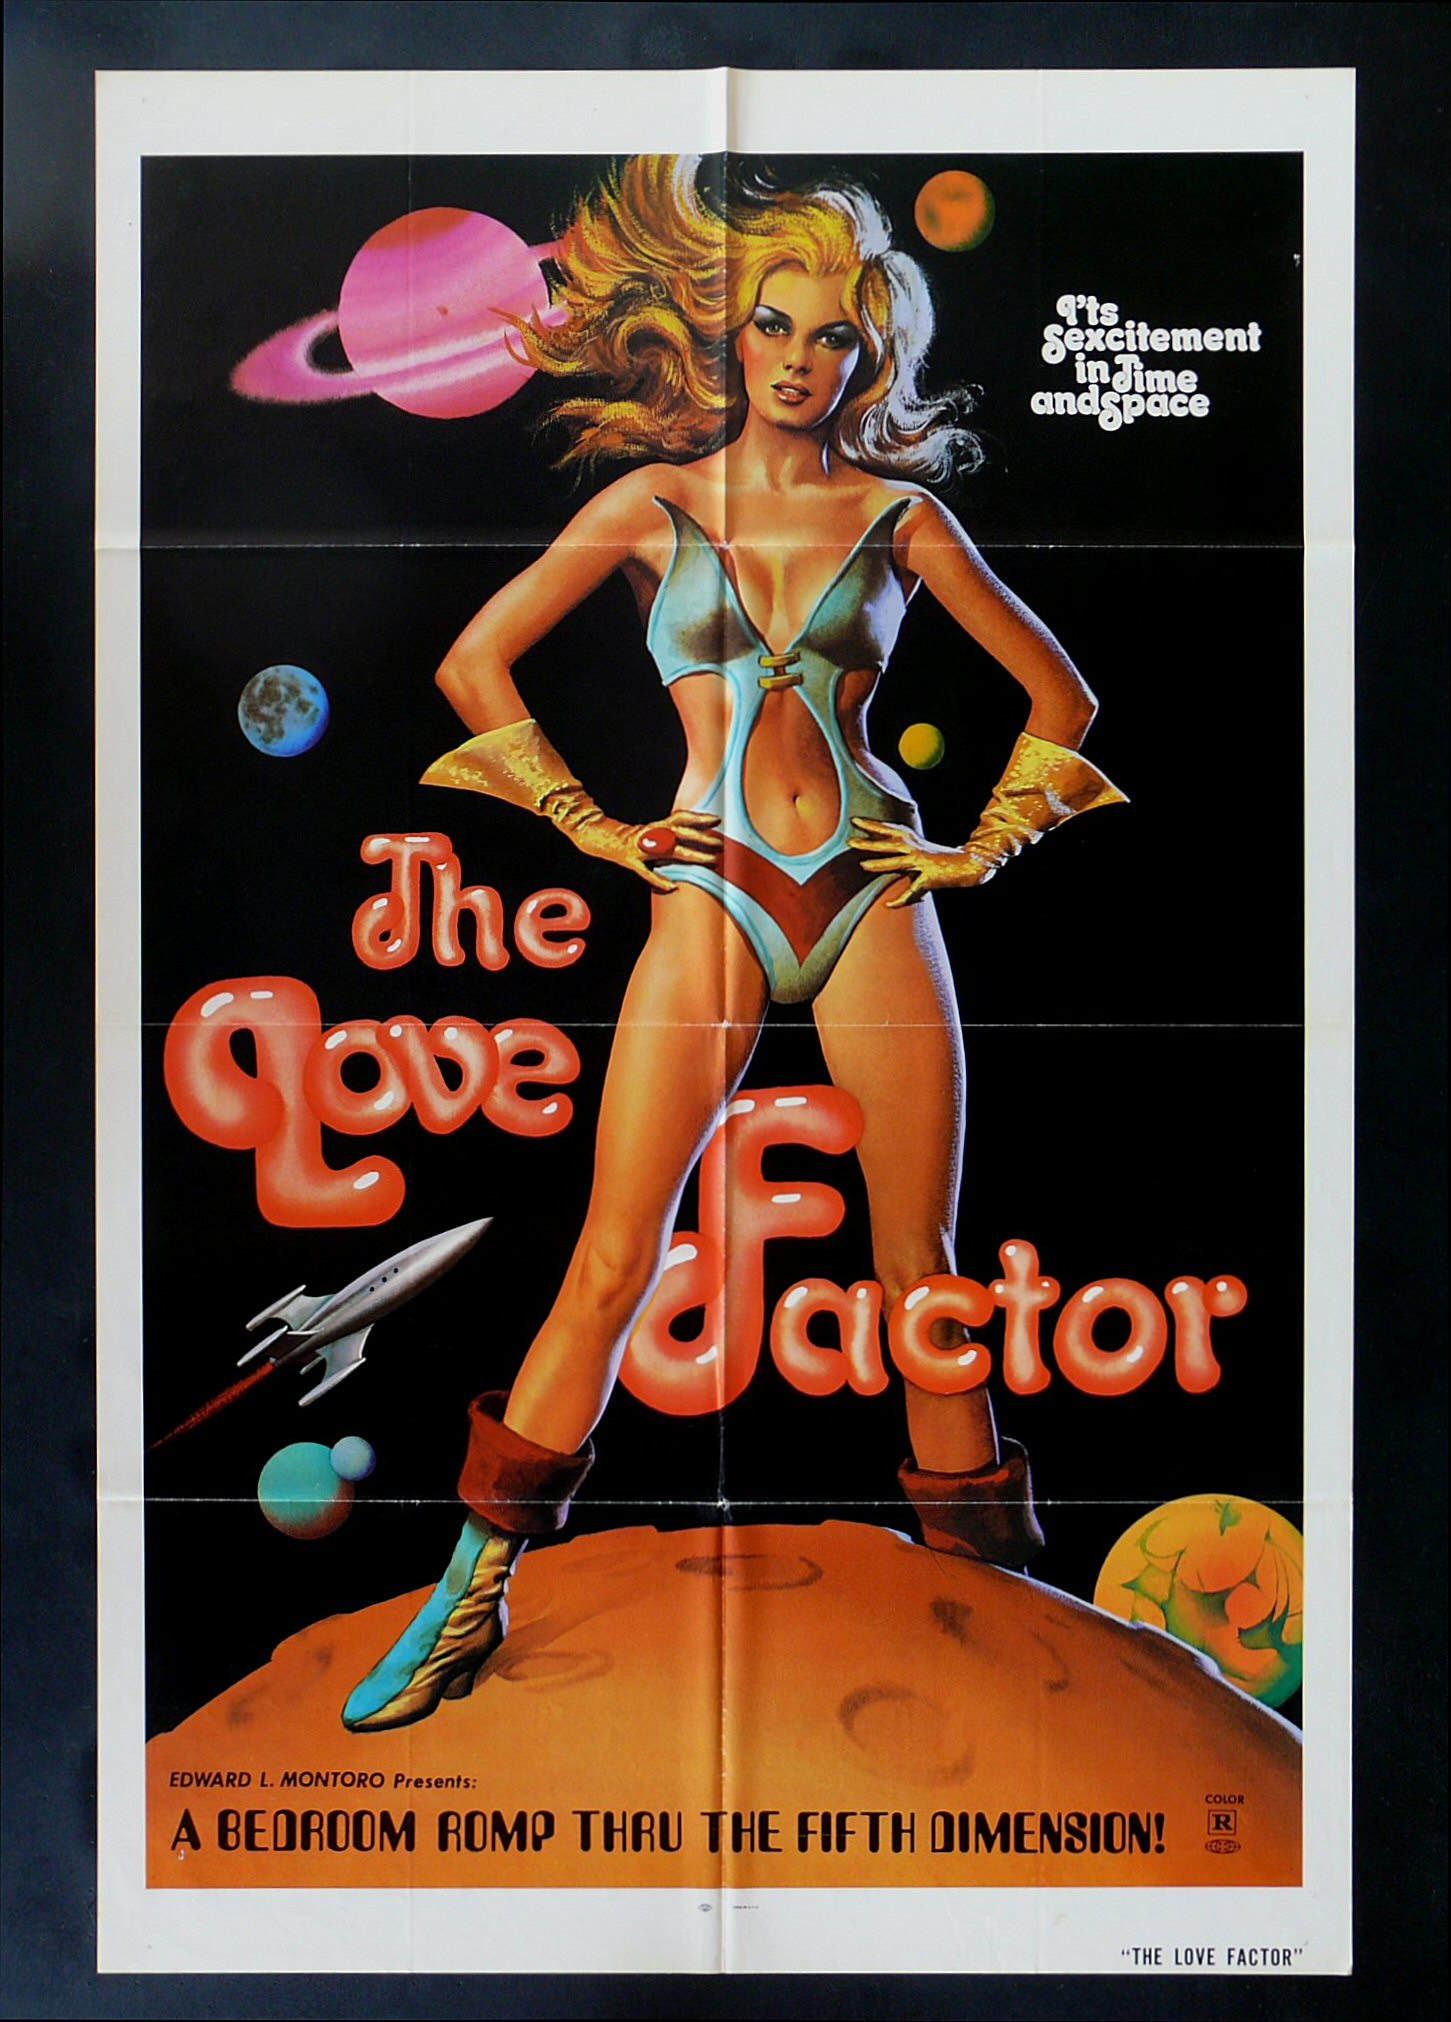 70s Porn Vintage Posters - Vintage Porn Posters and Covers - Gallery